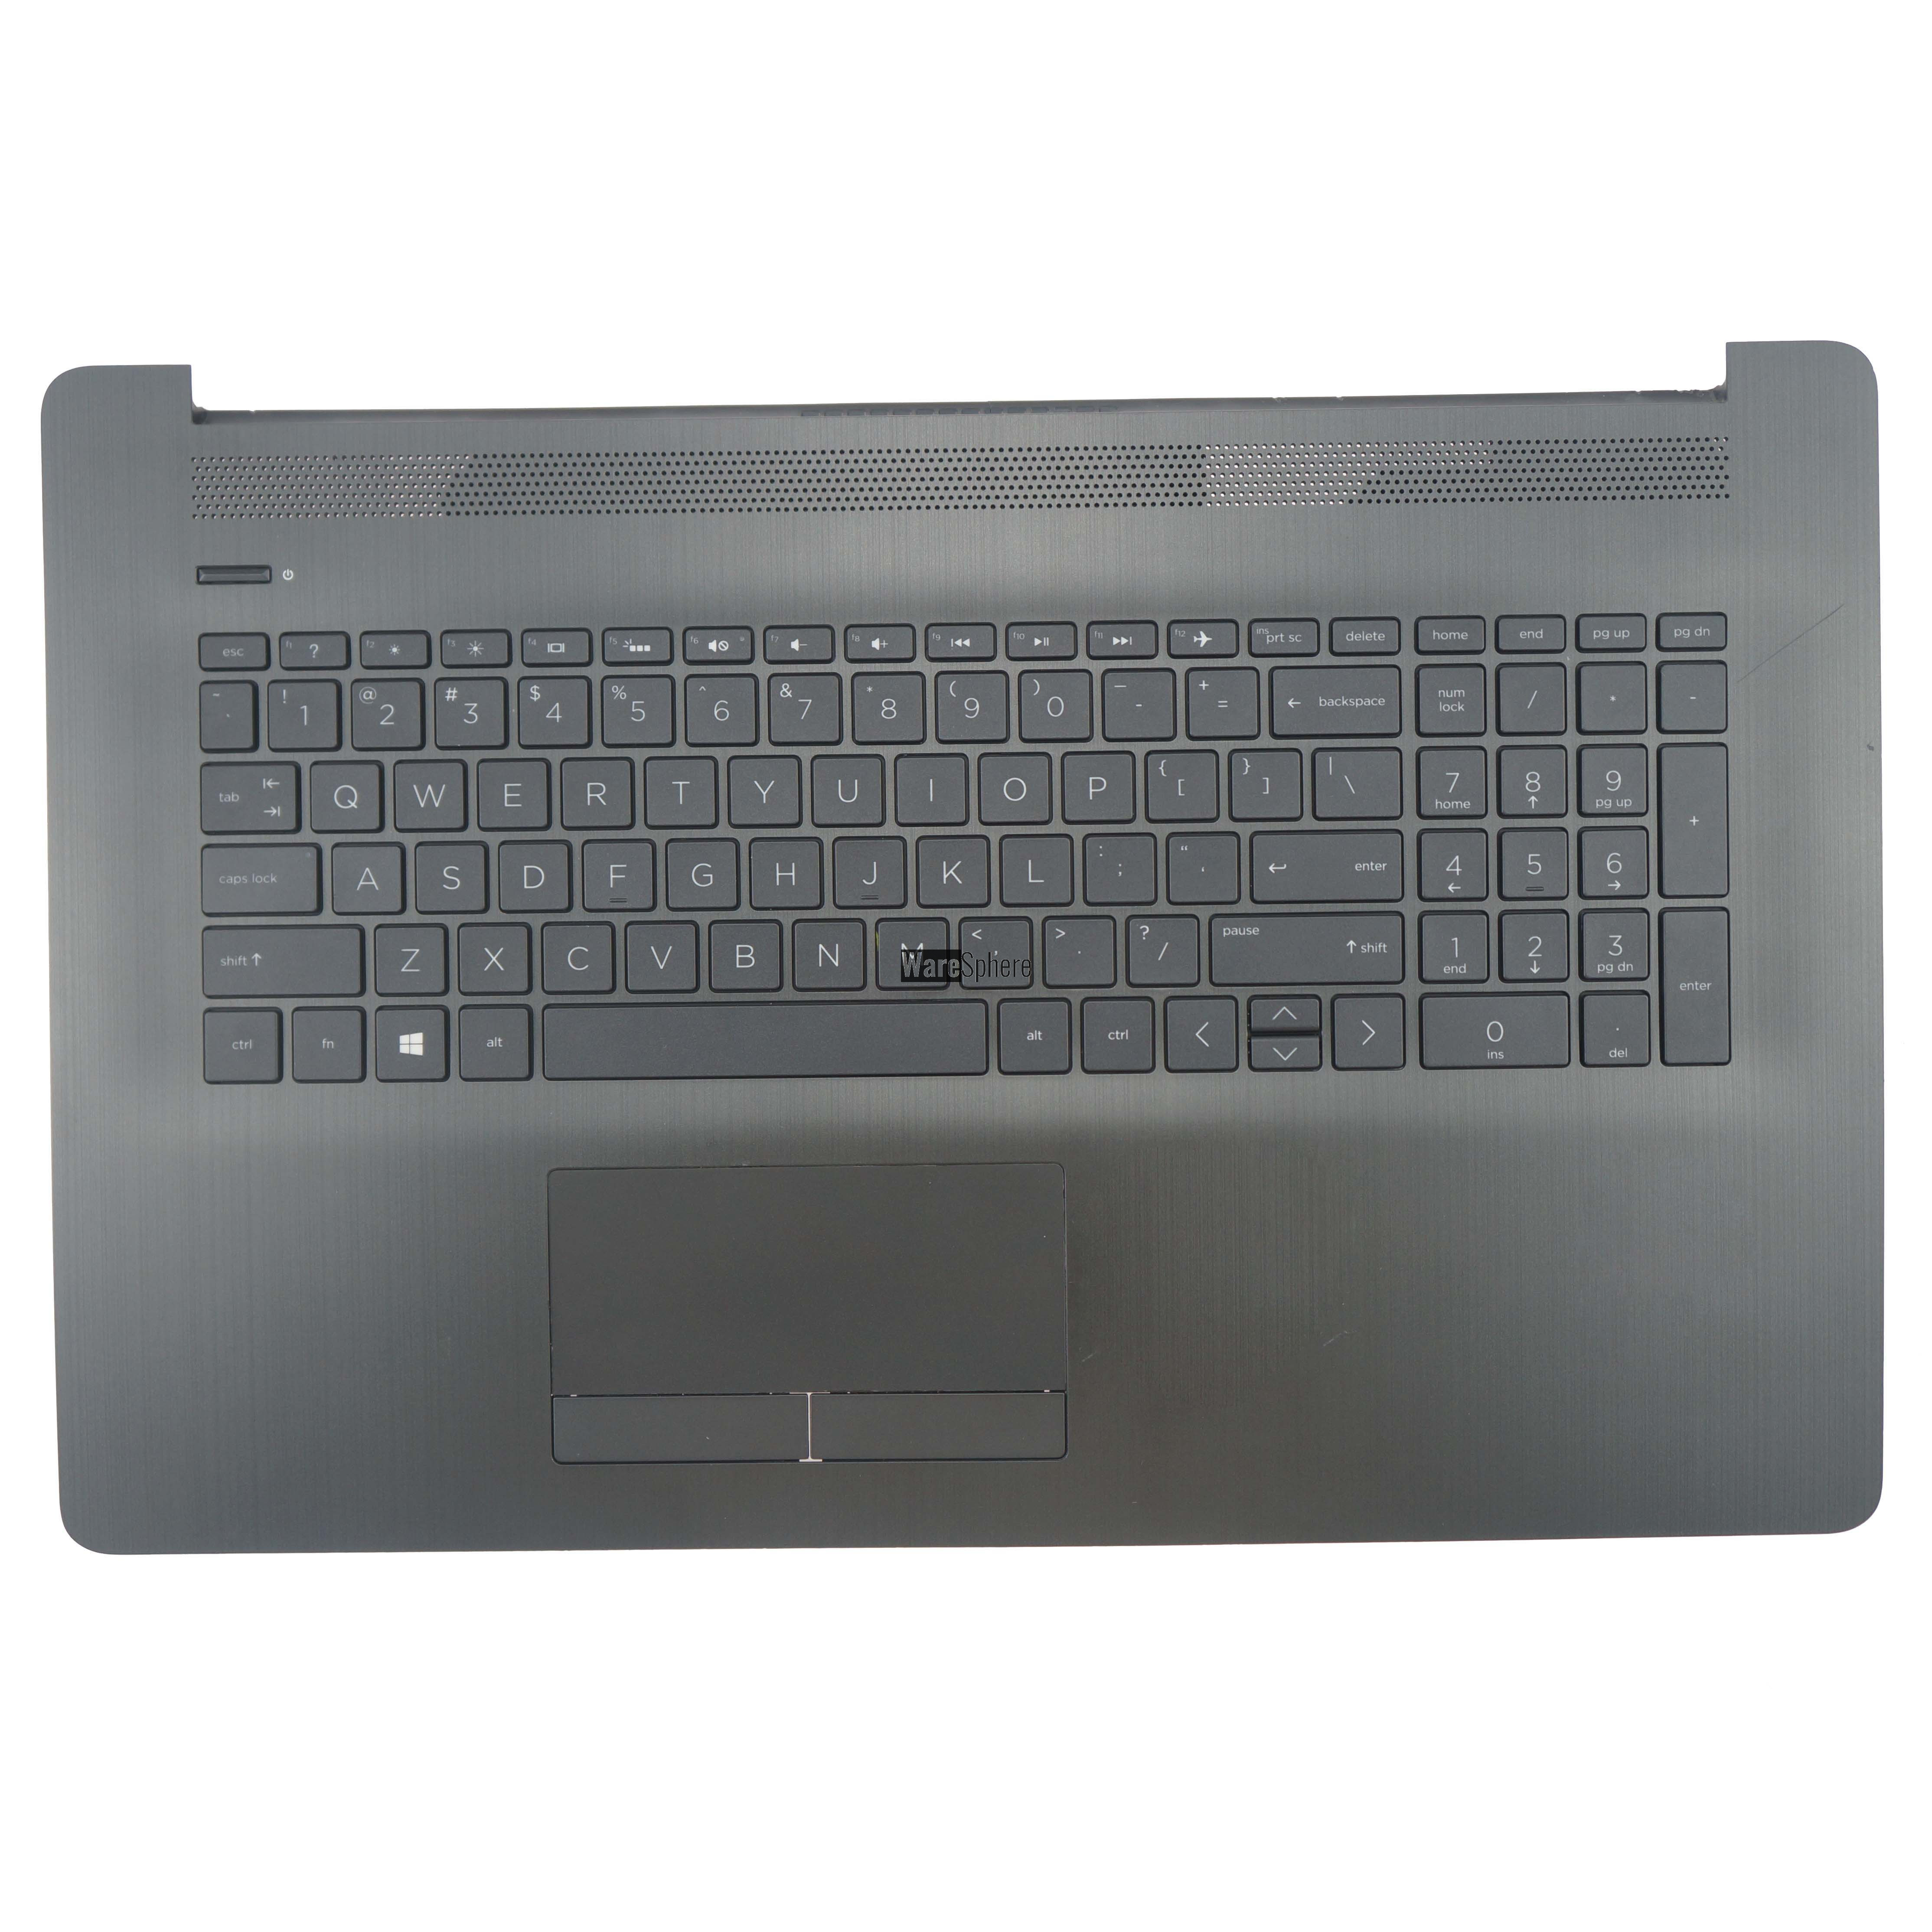 Top Cover Upper Case for HP 17-BY Palmrest With Backlit Keyboard 6070B1308103 L22749-001 Black US 